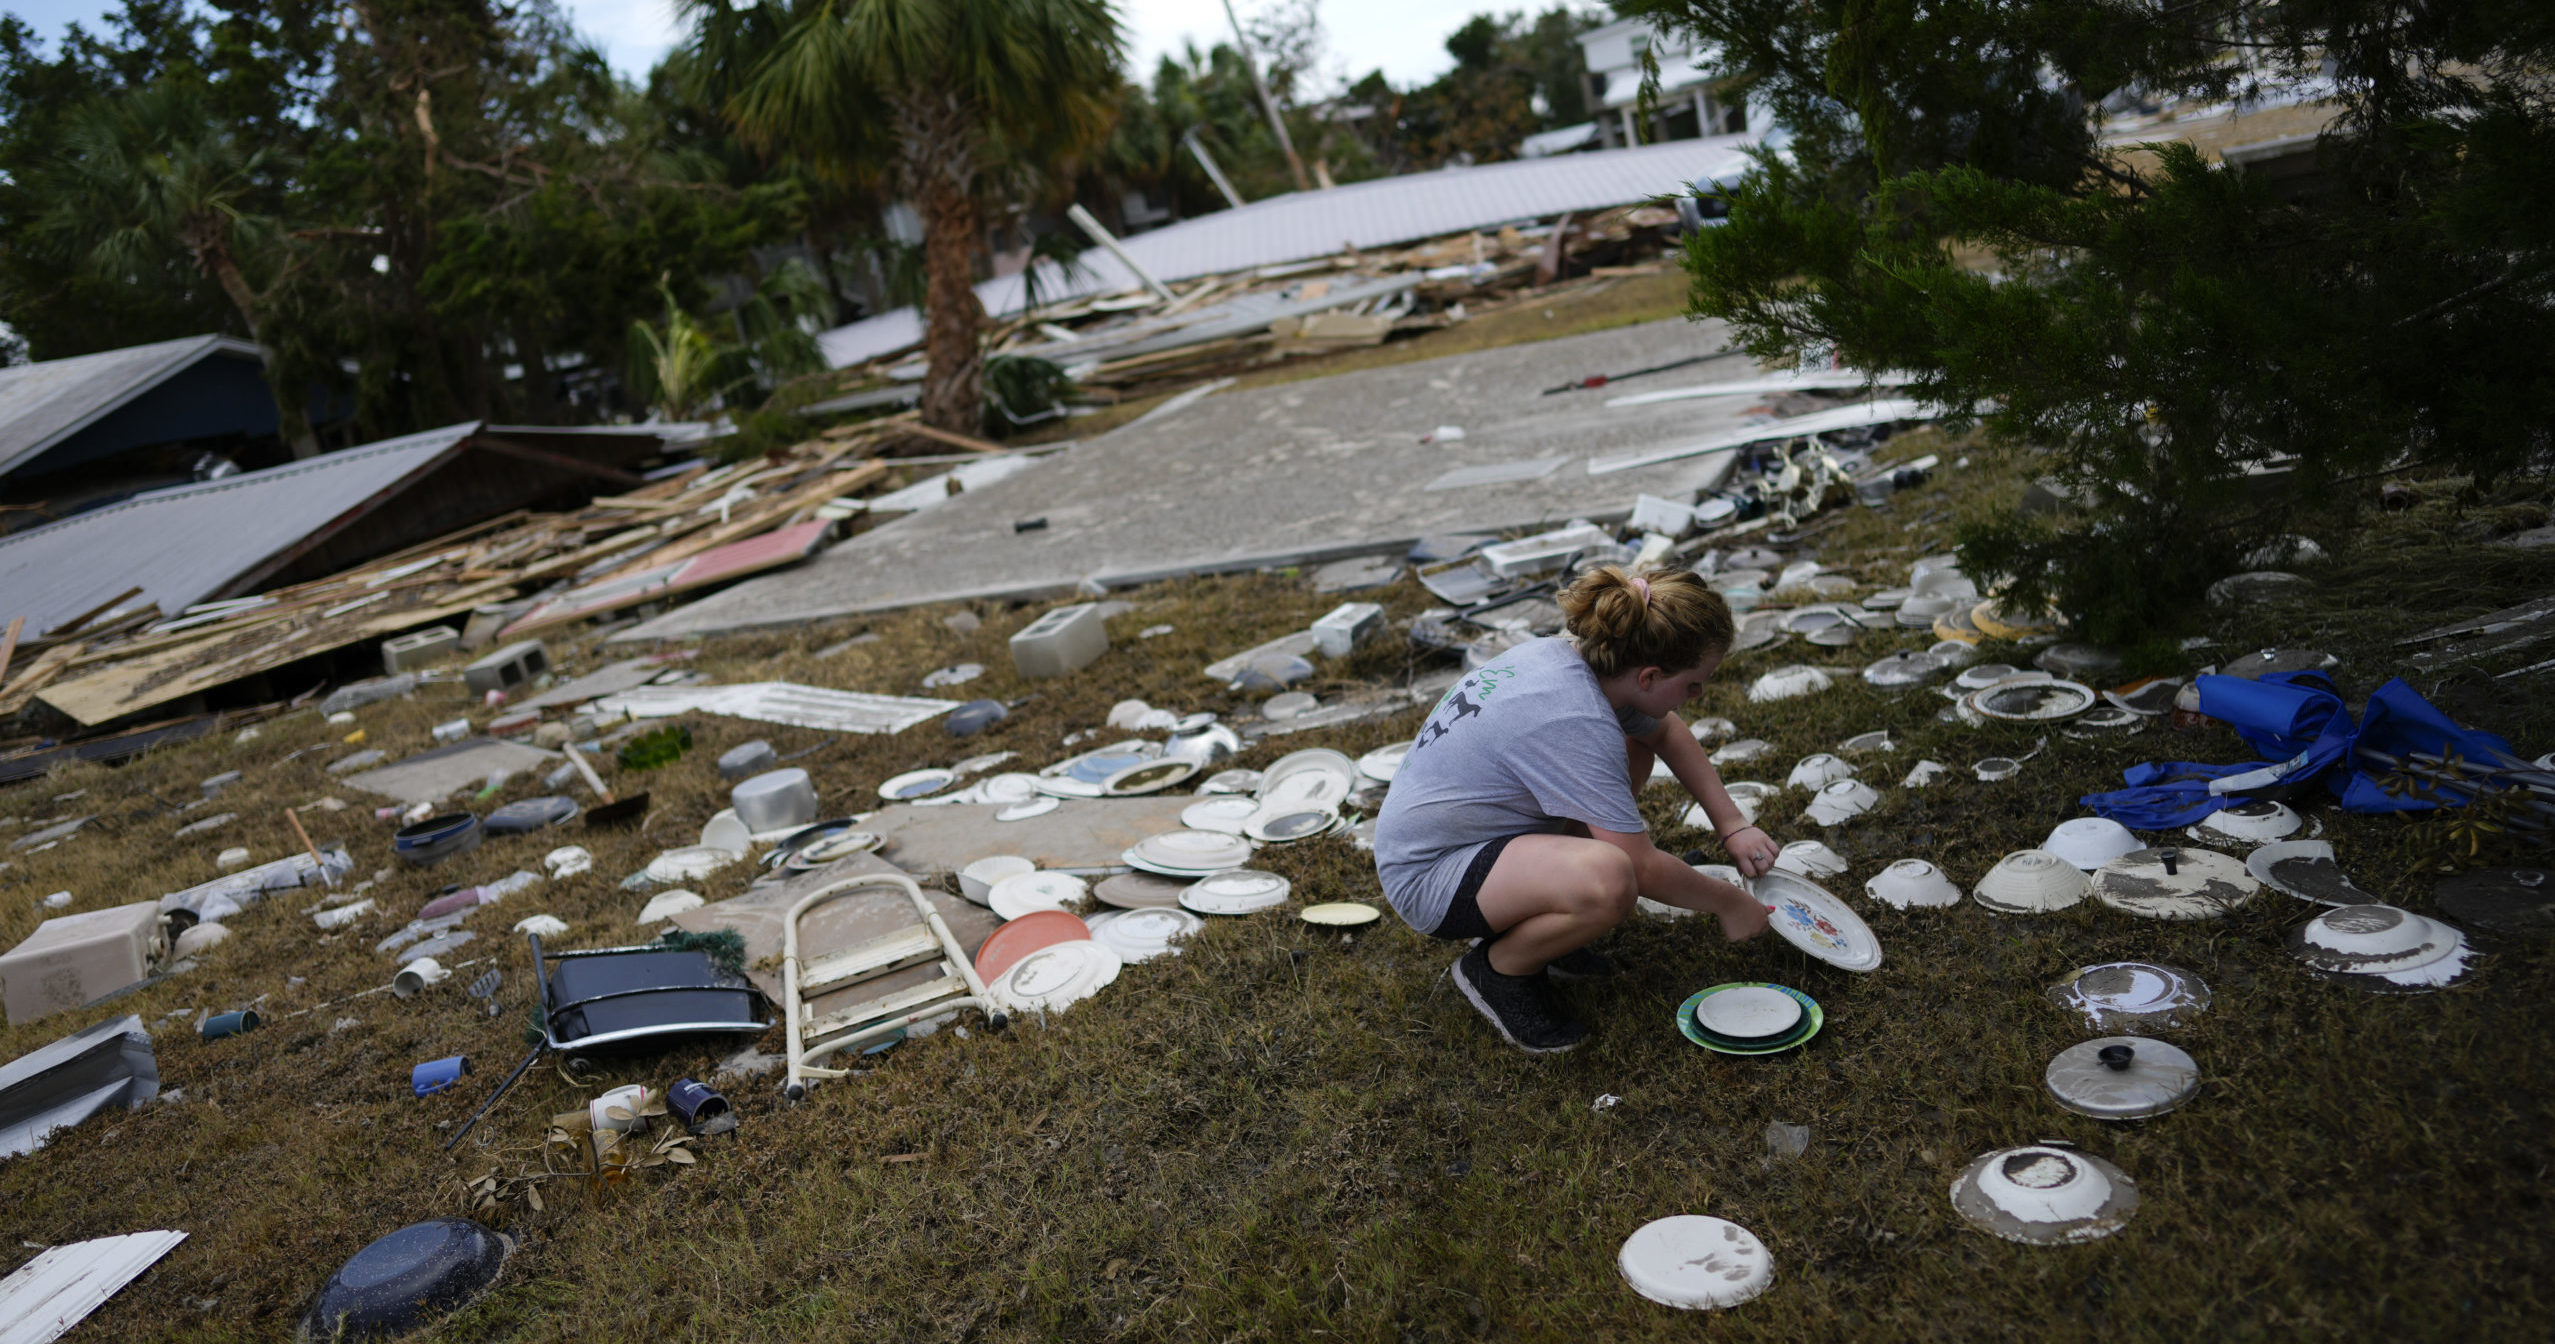 Lainey Hamelink, 9, whose family owned the property next door, helps to collect scattered dishes at Tina's Dockside Inn, which was completely destroyed in Hurricane Idalia, on September 1, 2023 in Horseshoe Beach, Florida.